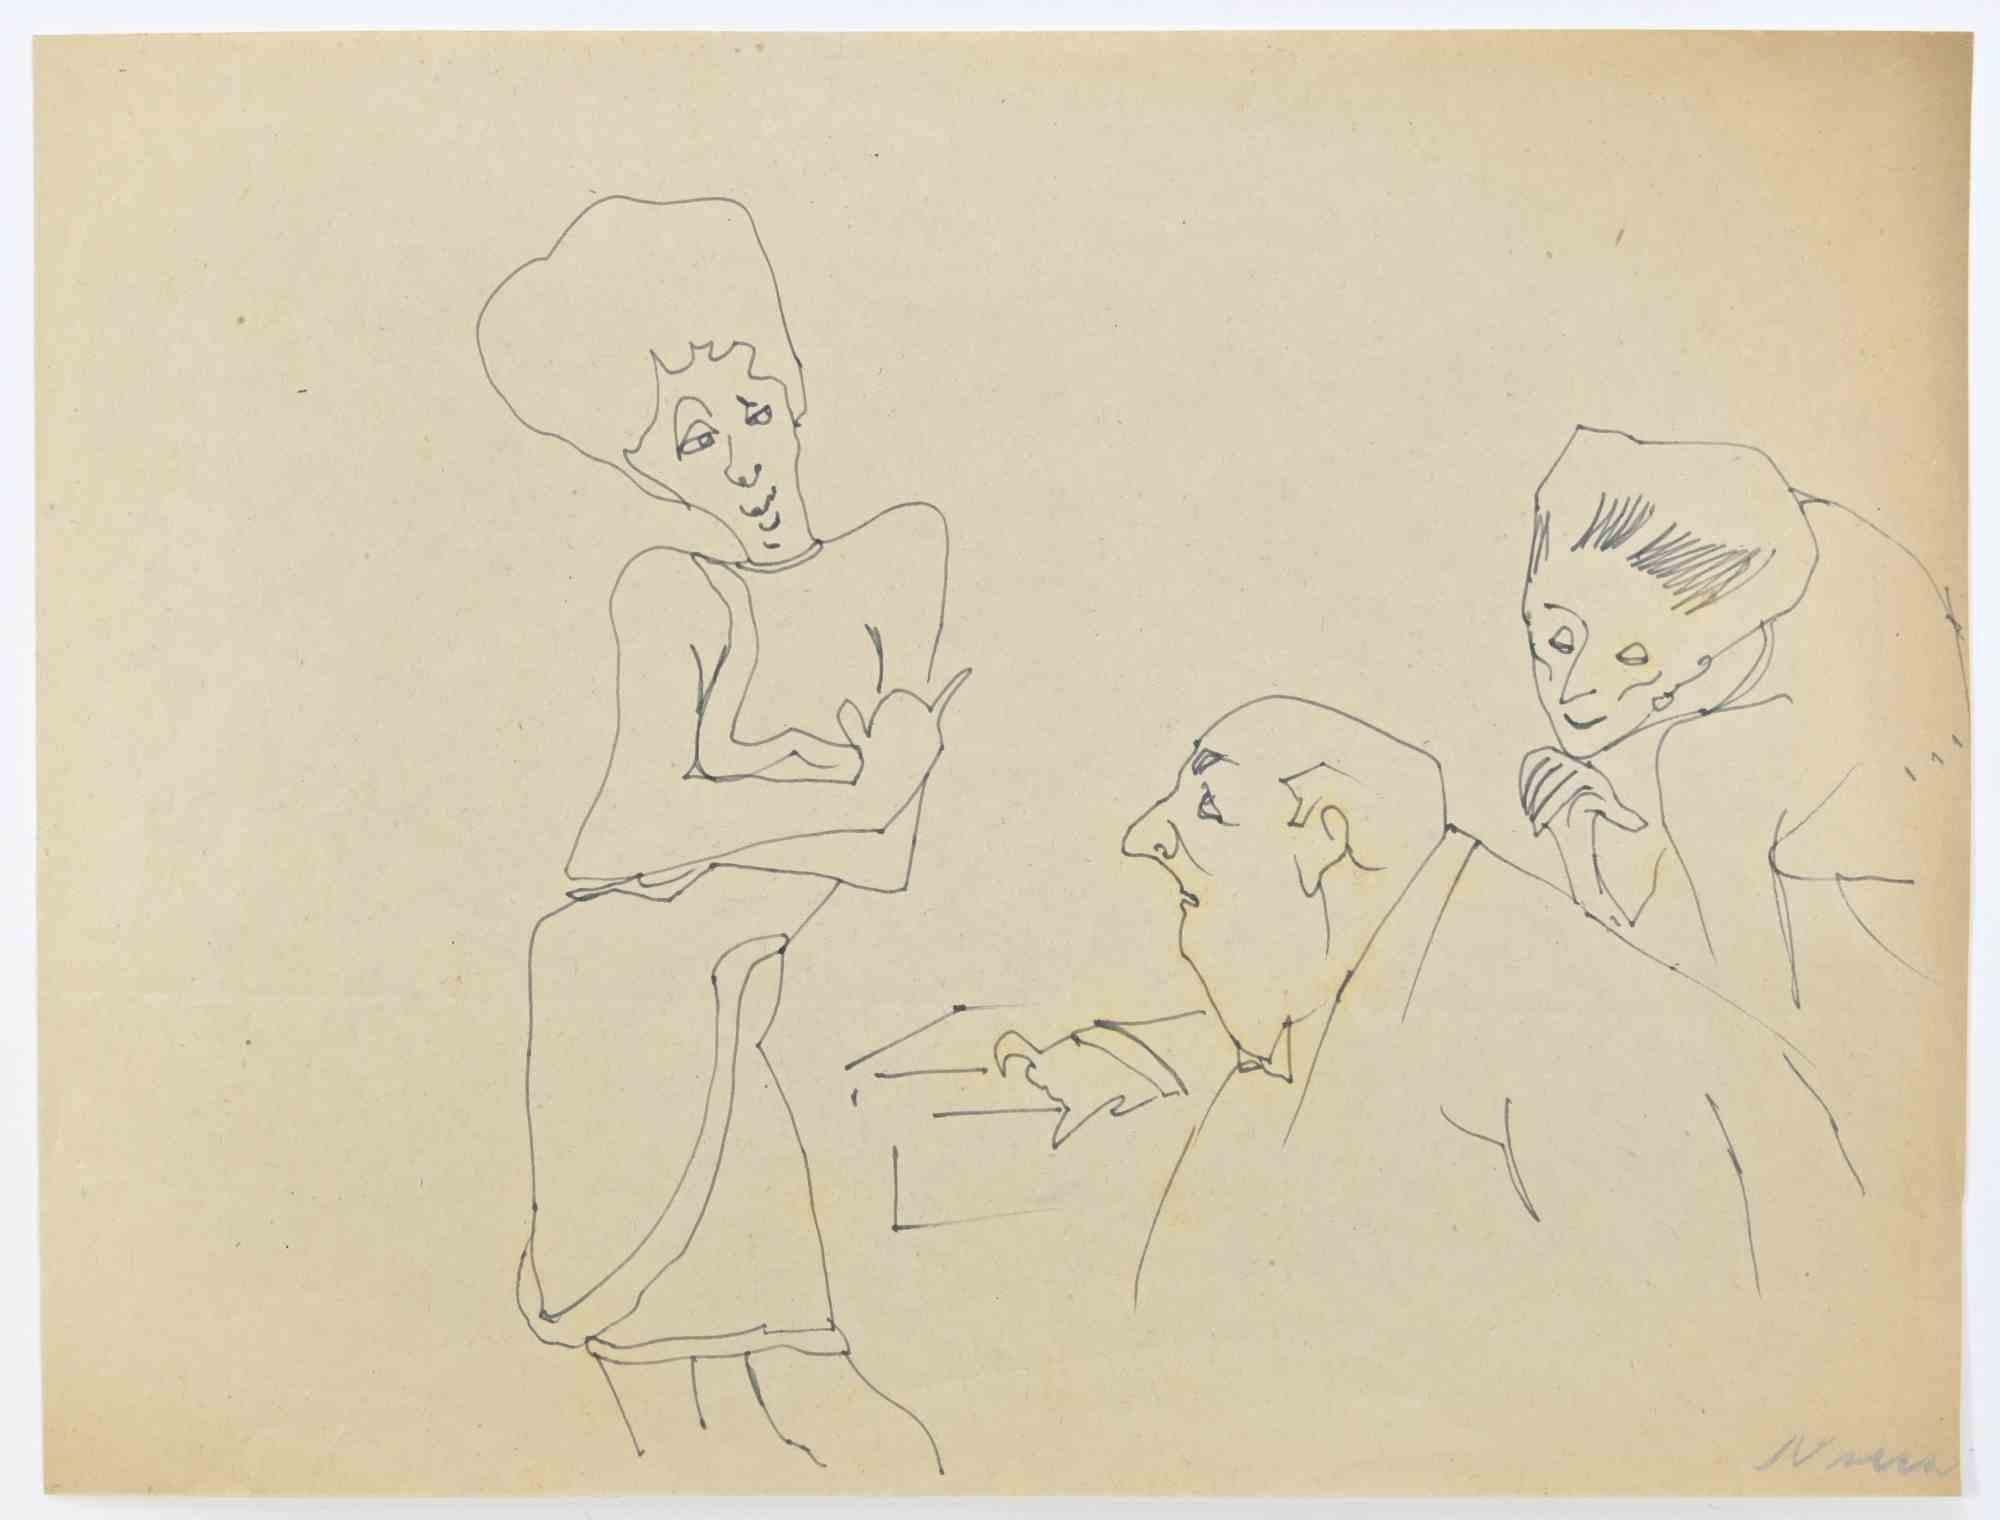 Flirtatious Women is a Pen Drawing realized by Mino Maccari  (1924-1989) in the 1960s.

Hand-signed on the lower margin.

Good condition.

Mino Maccari (Siena, 1924-Rome, June 16, 1989) was an Italian writer, painter, engraver and journalist, winner